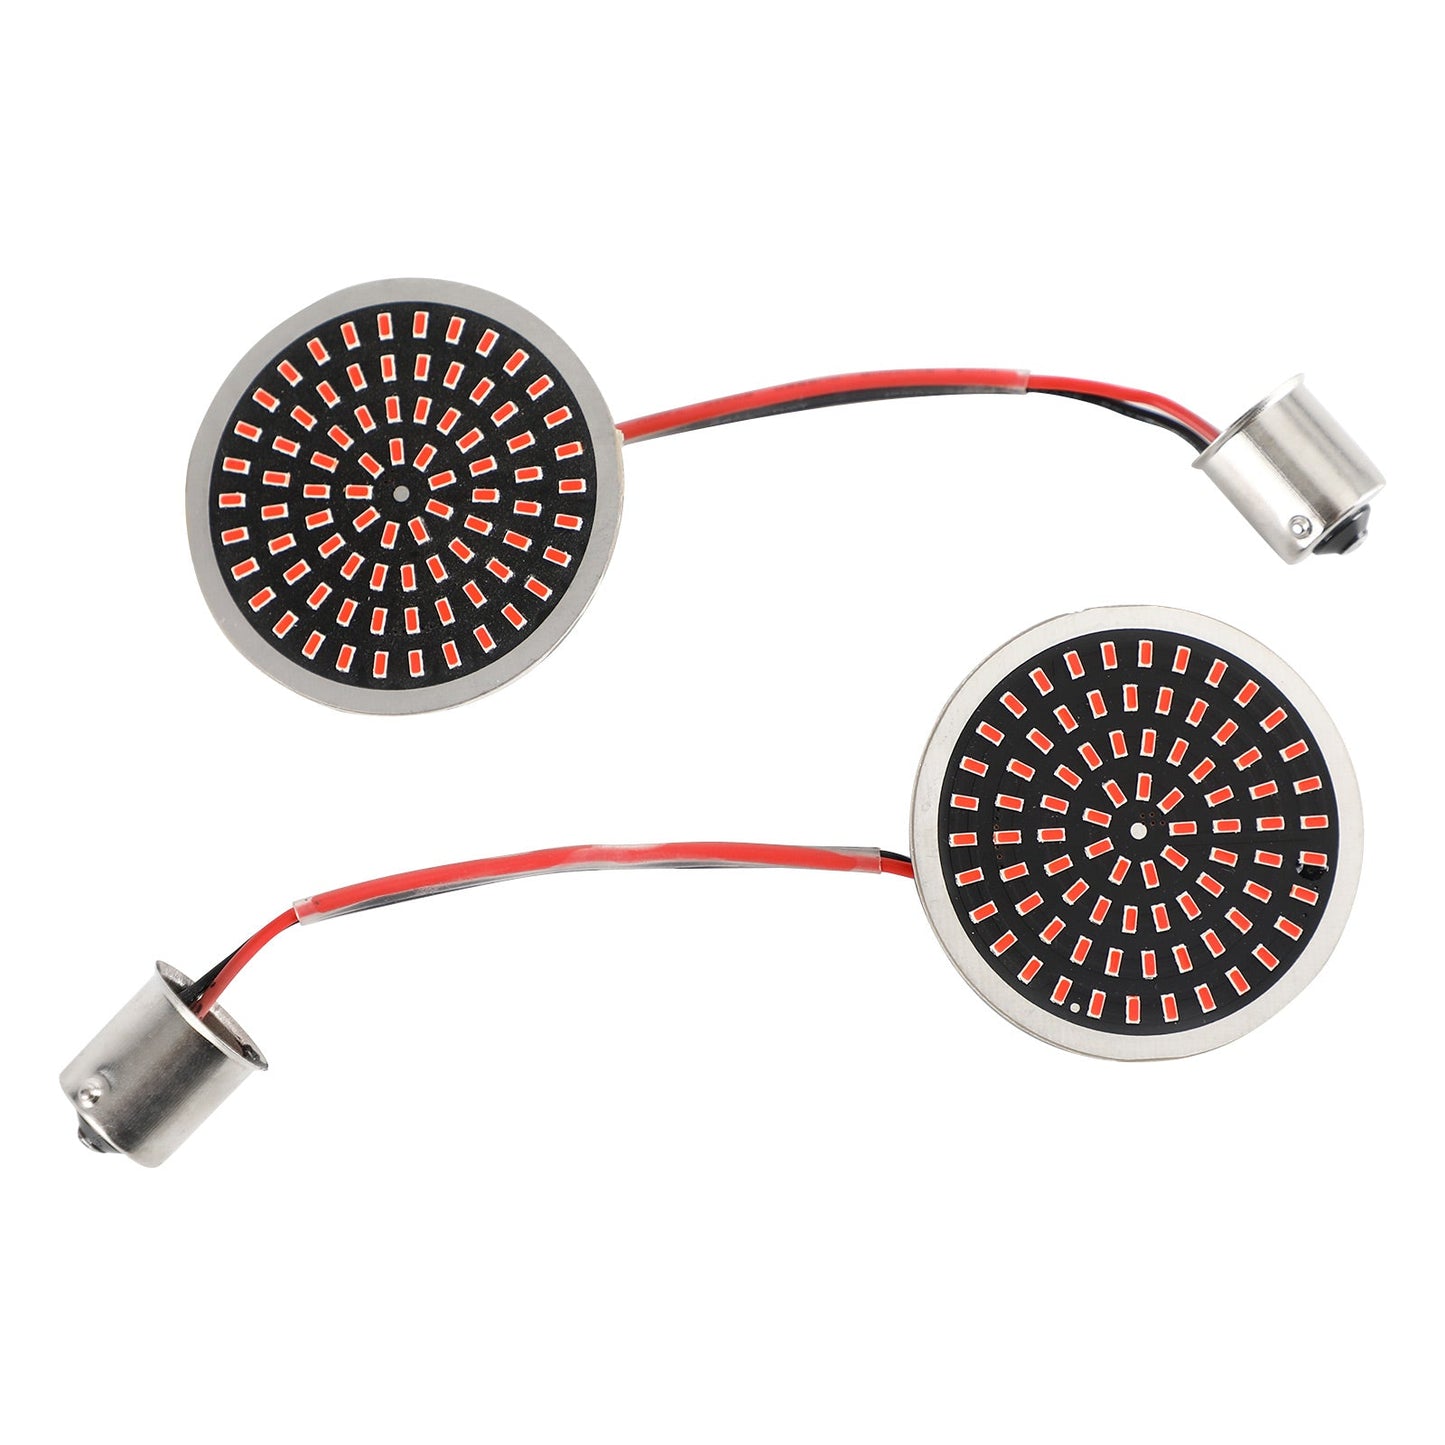 1156 LED Turn Signal Light Inserts Lamp Fit for Softail Touring Dyna Sportster